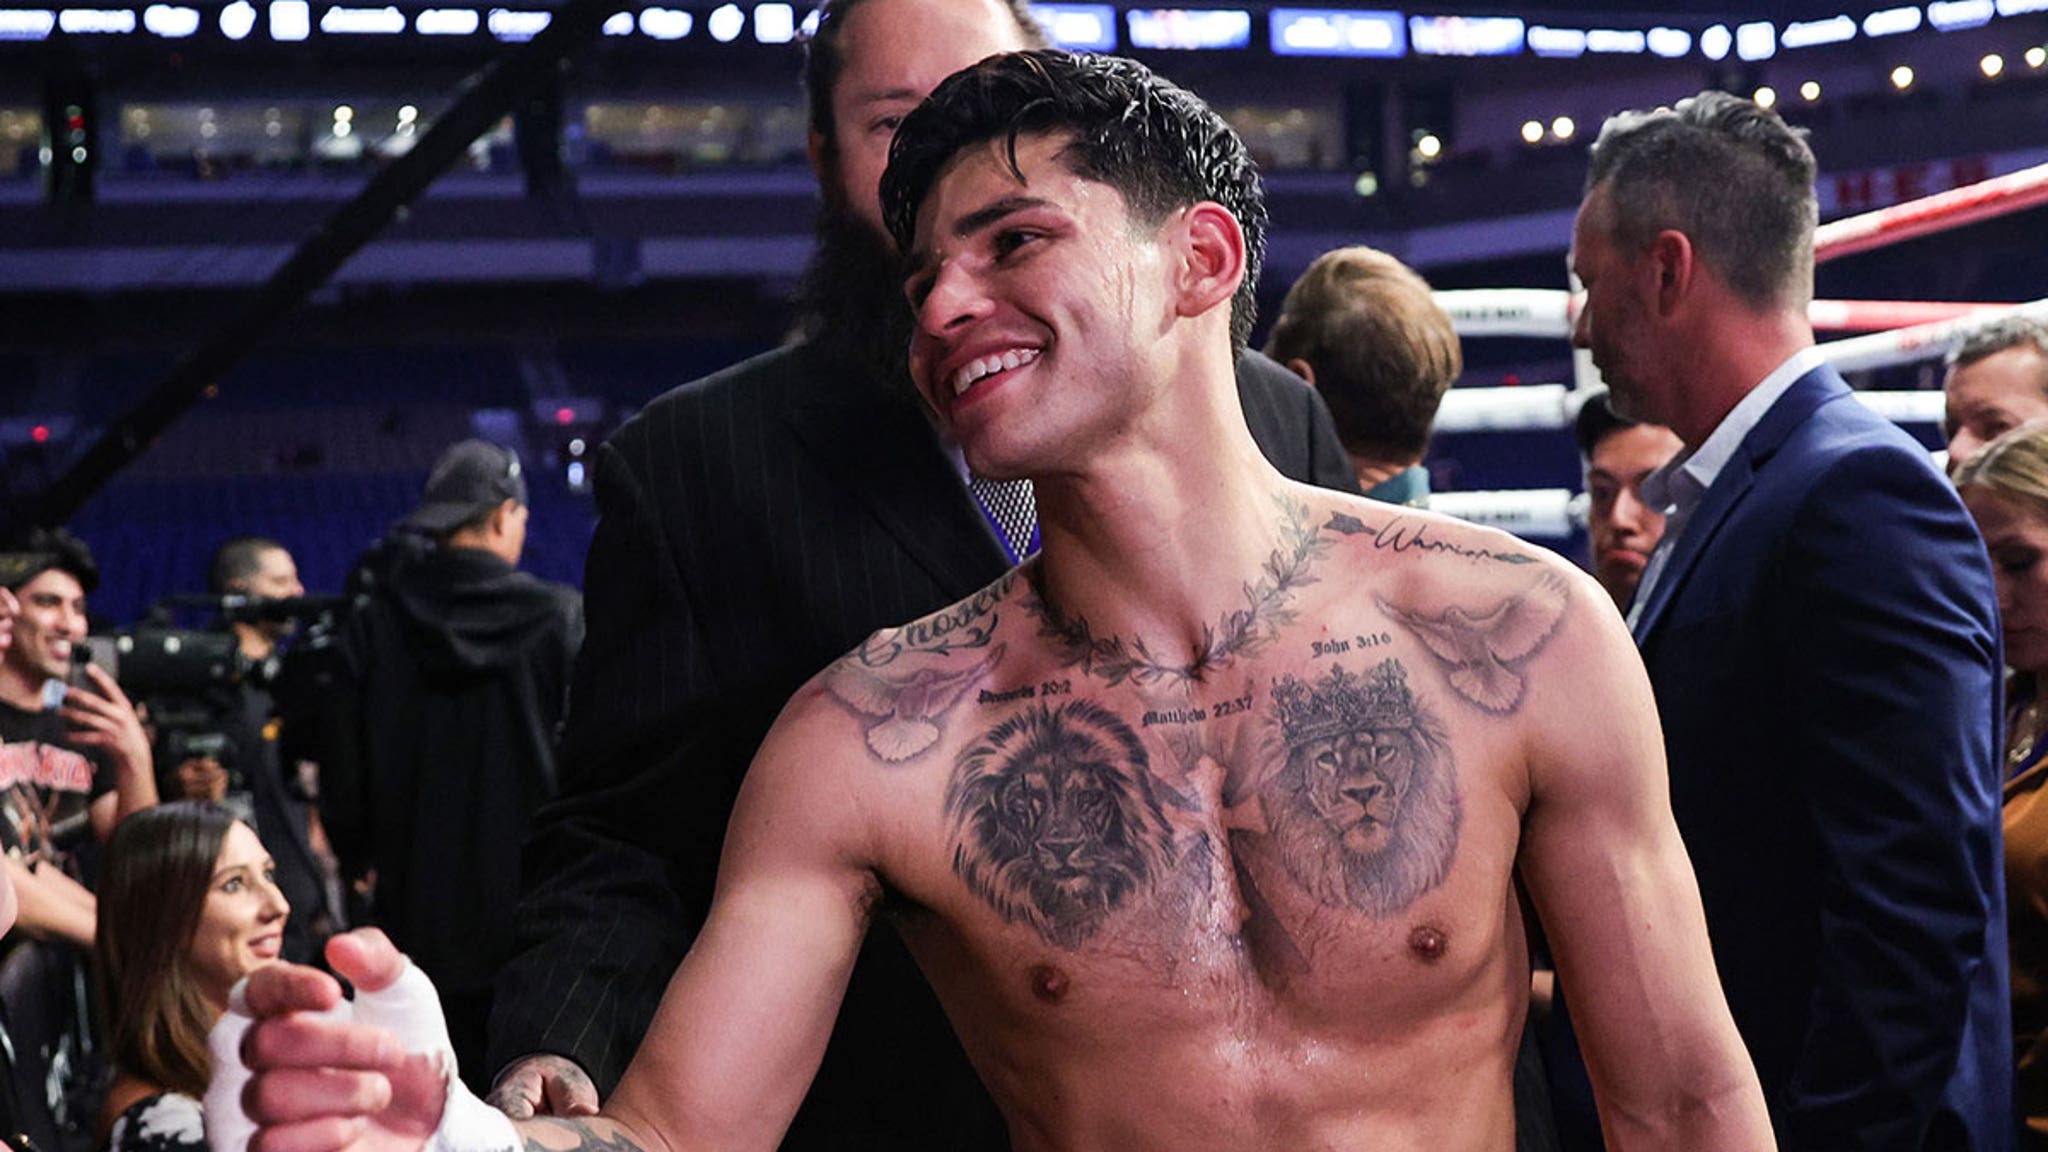 Ryan Garcia Admits He's Insecure About His Tattoos After Fan's Mean Tweet